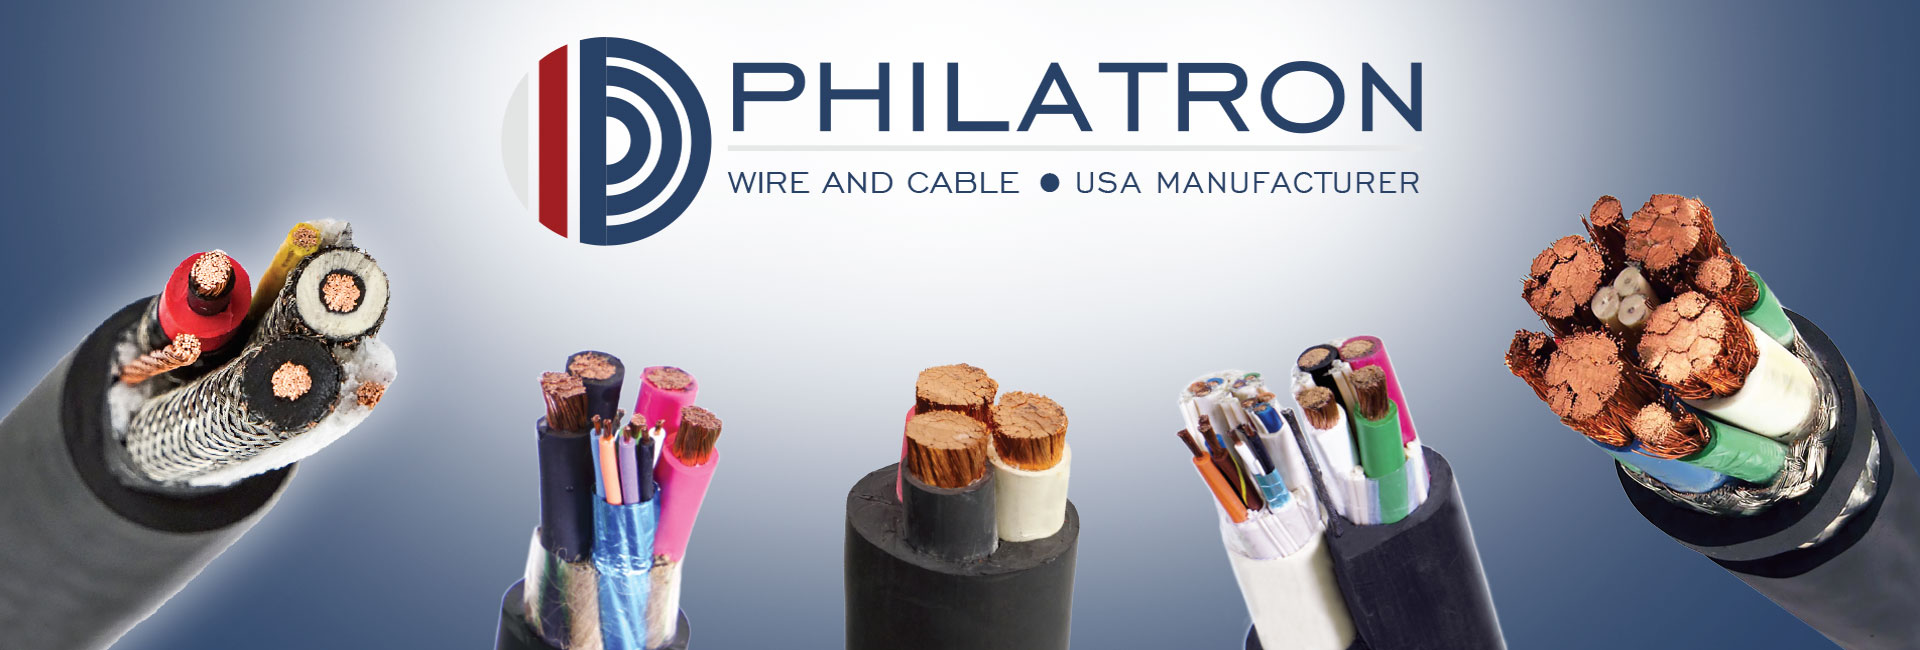 Custom Electrical Cables Manufacured un the usa by philatron, eve cable, military cable, high voltage cable.